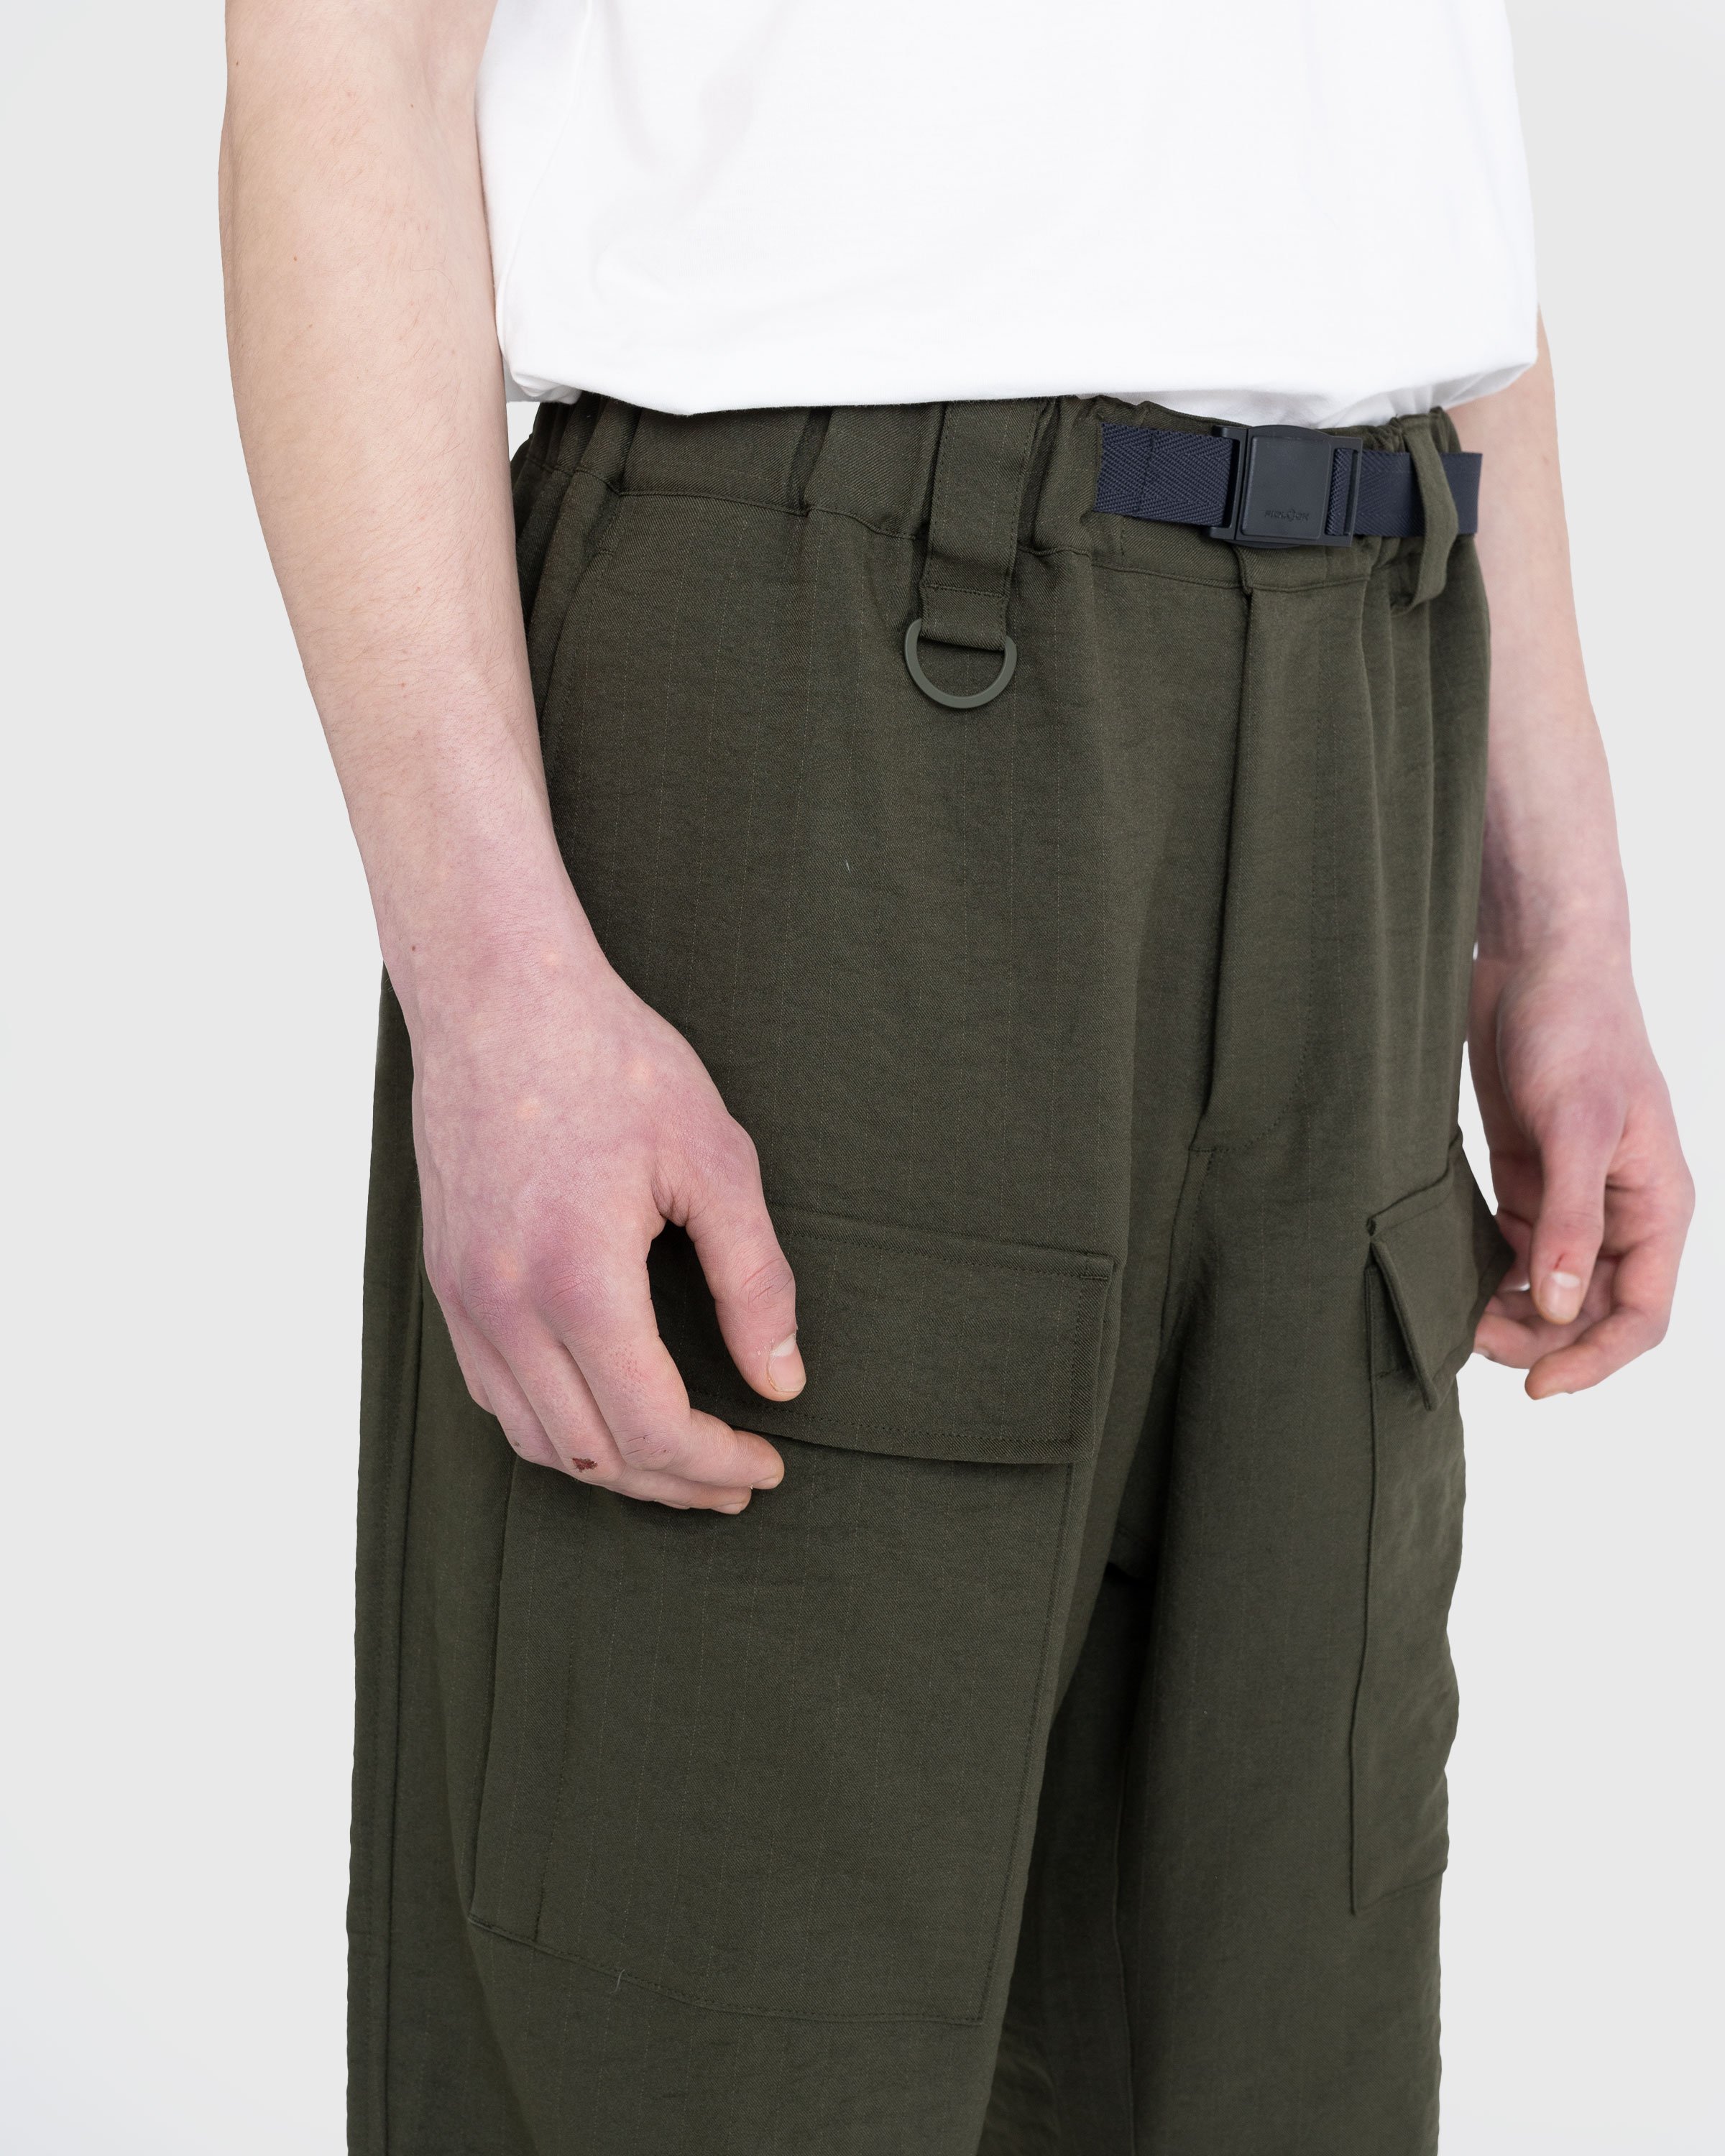 Y-3 - CL SL Cargo Pants - Clothing - Green - Image 5